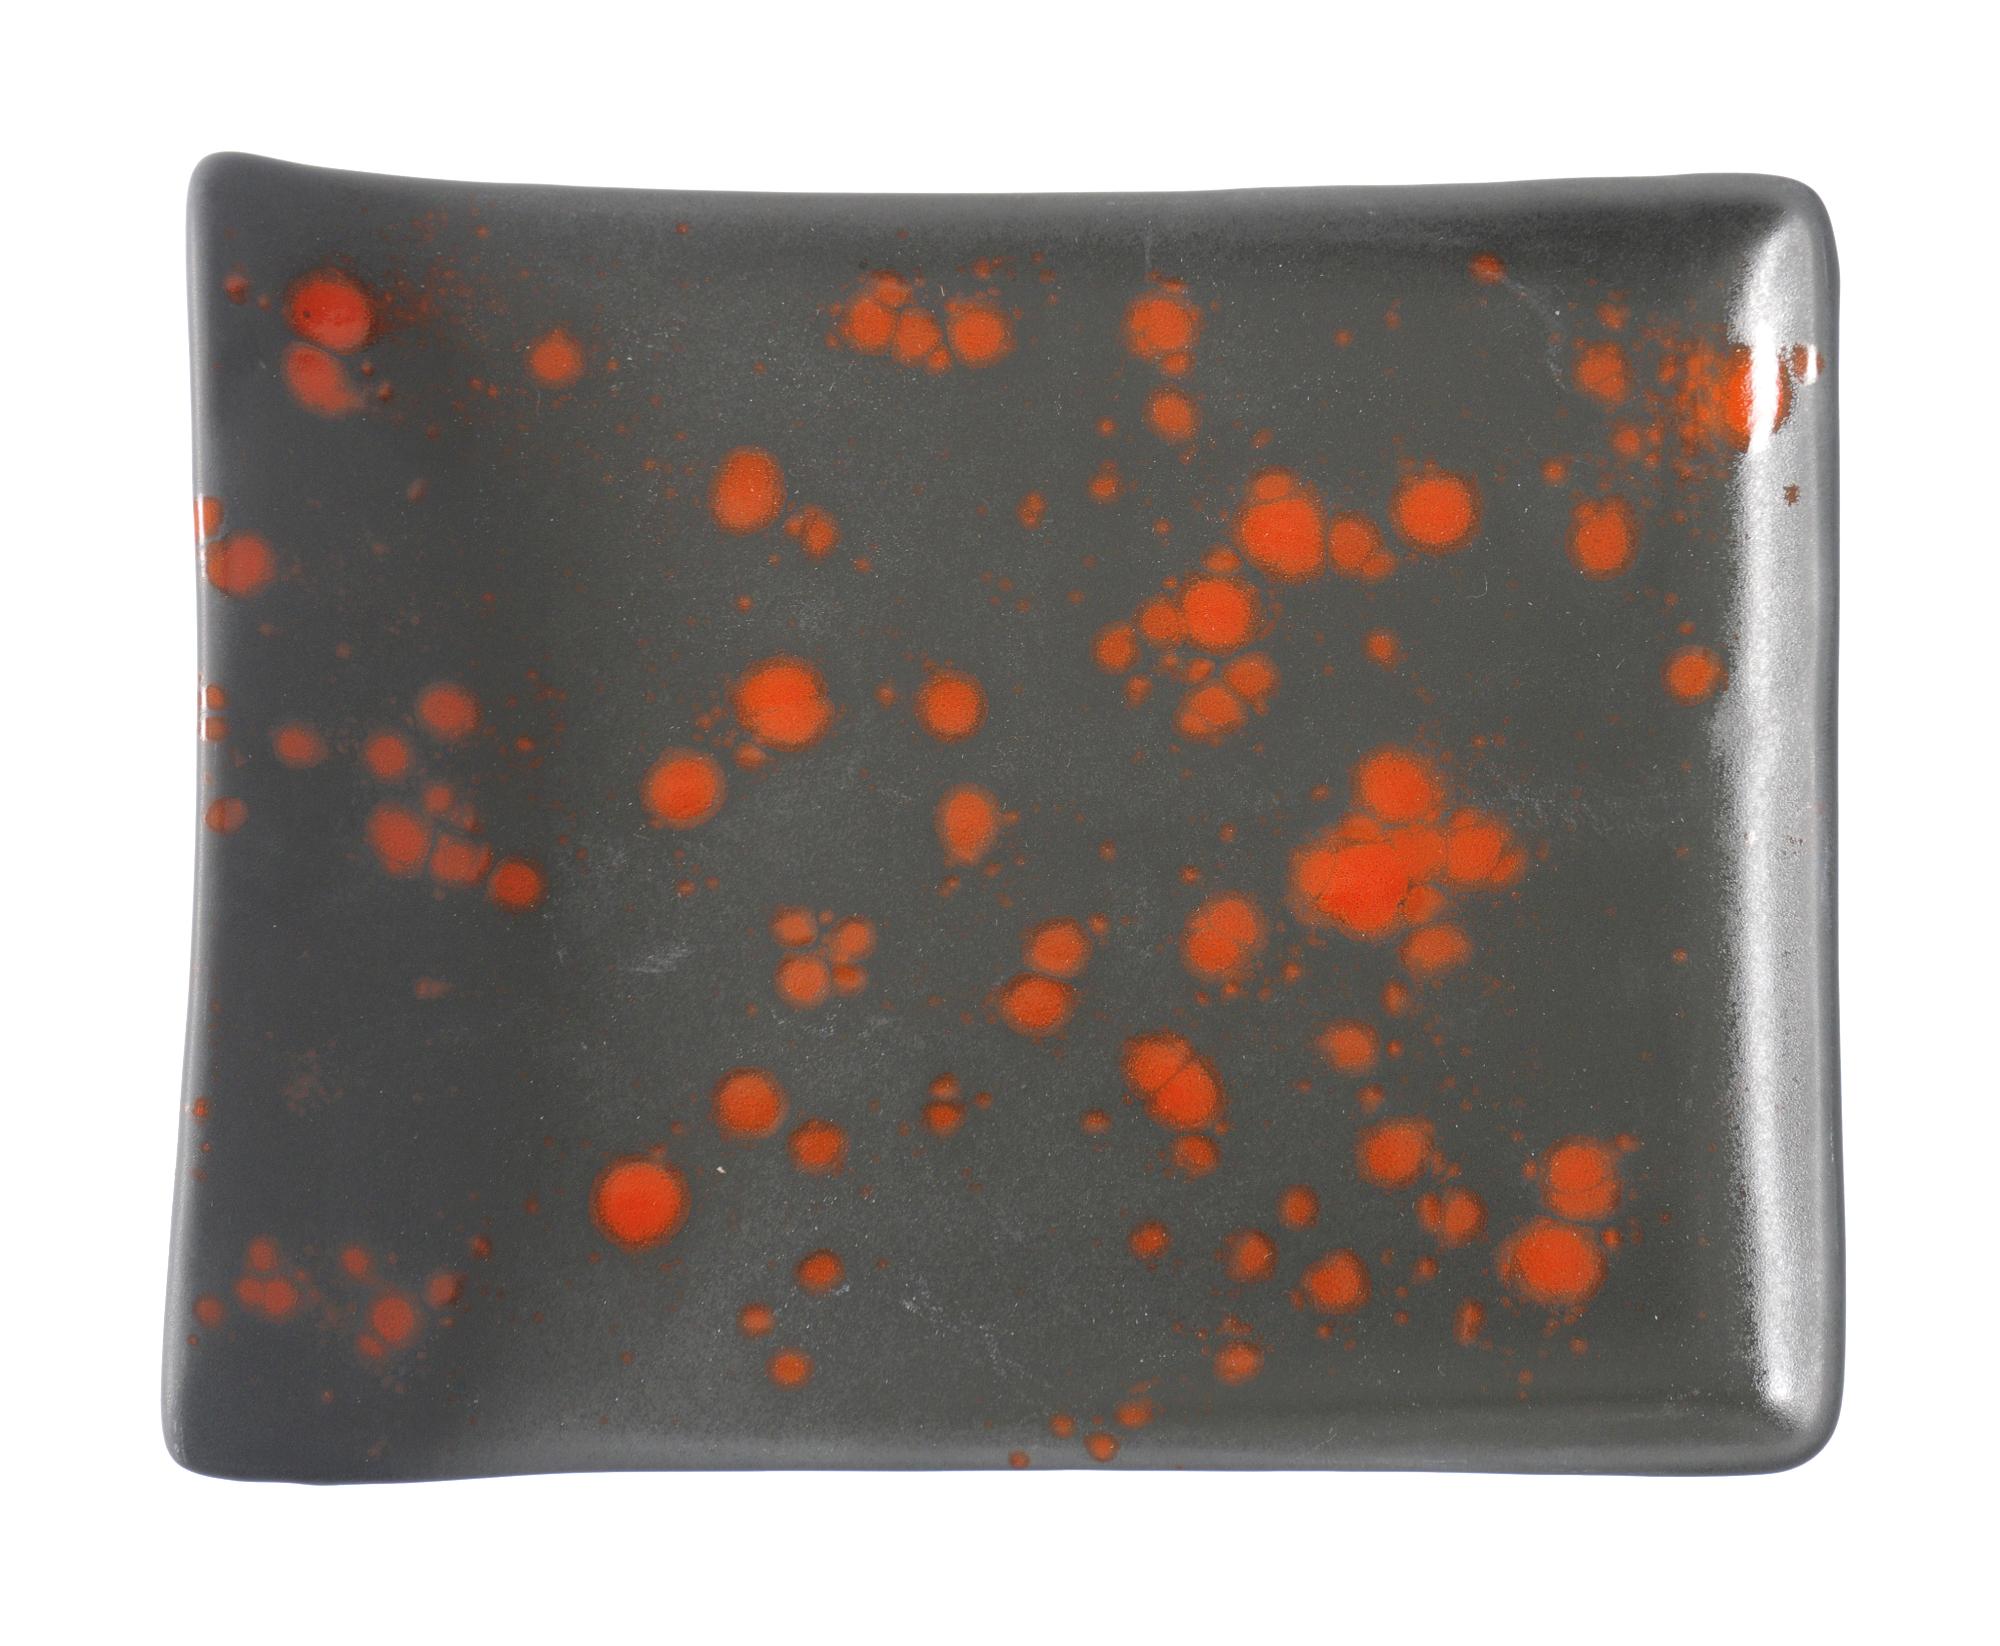 Bloom serving plate, 215x90mm